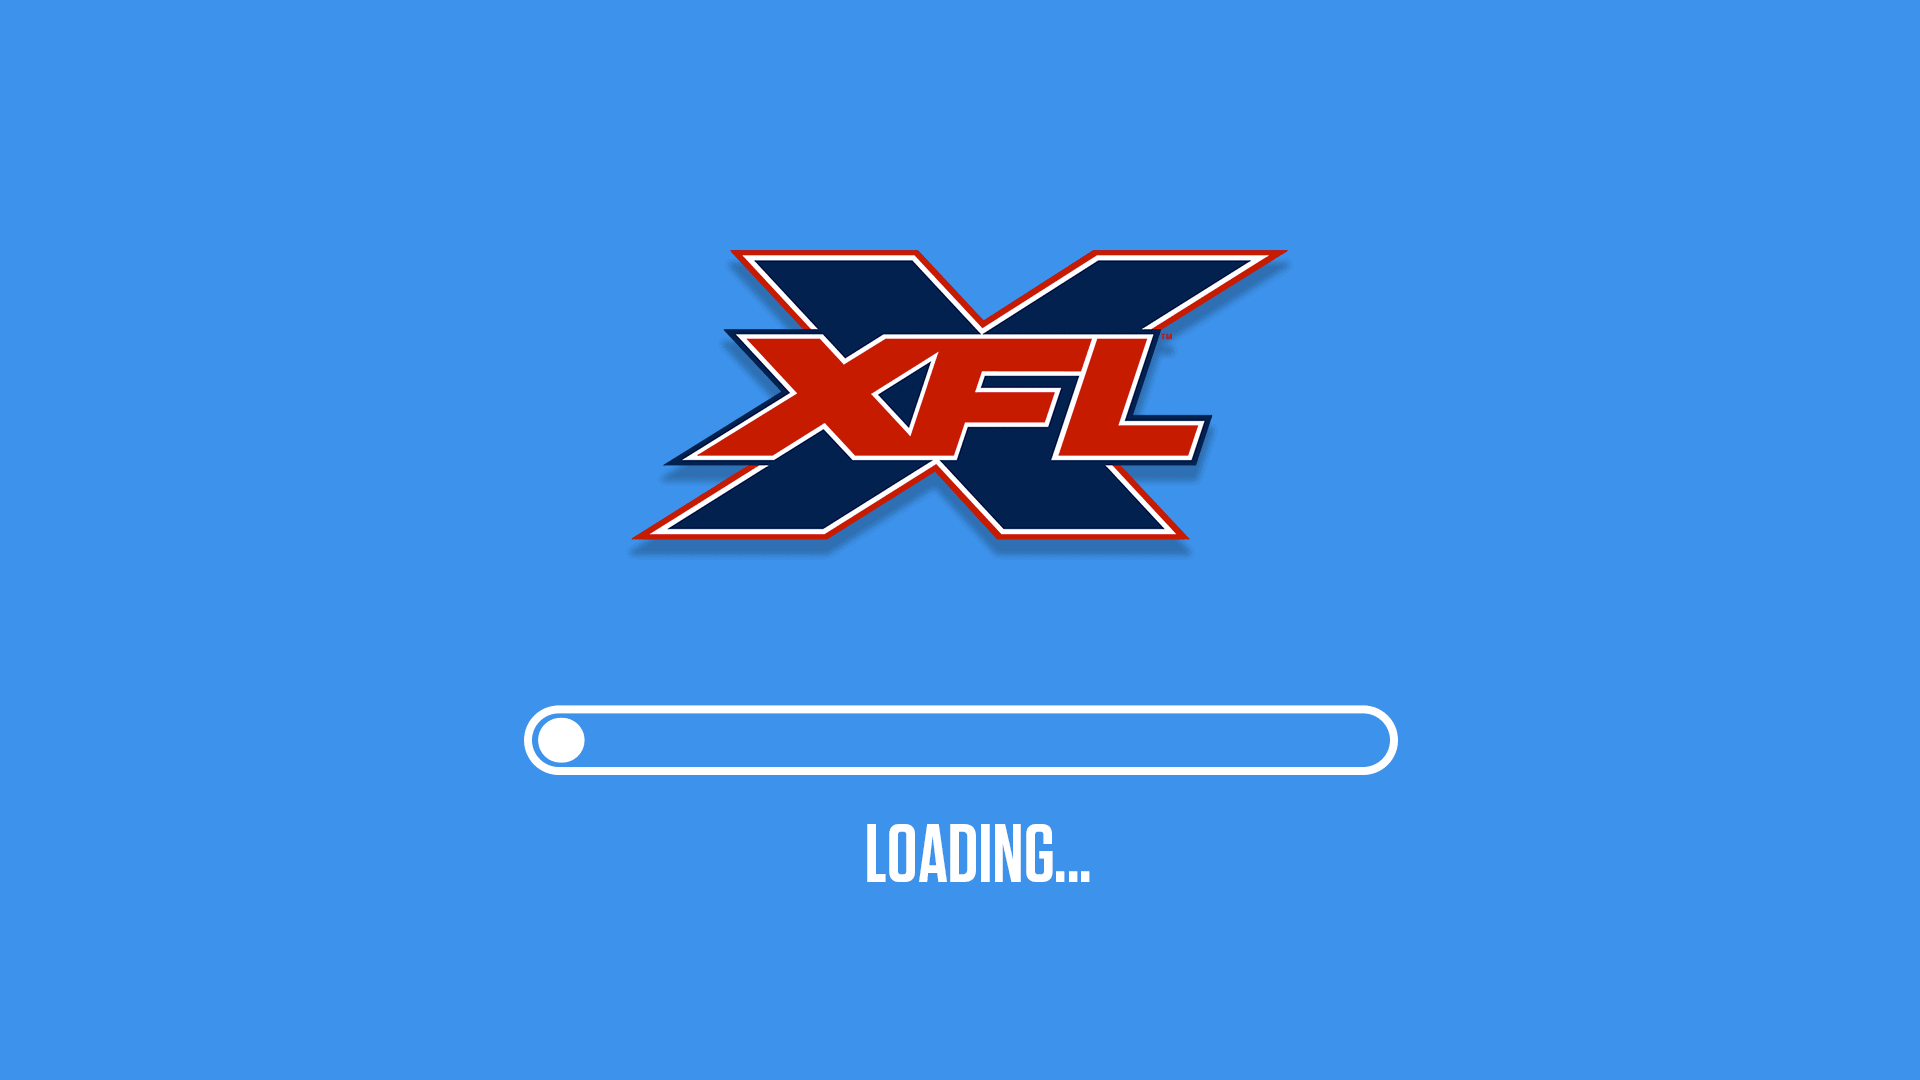 The XFL logo and a loading bar.